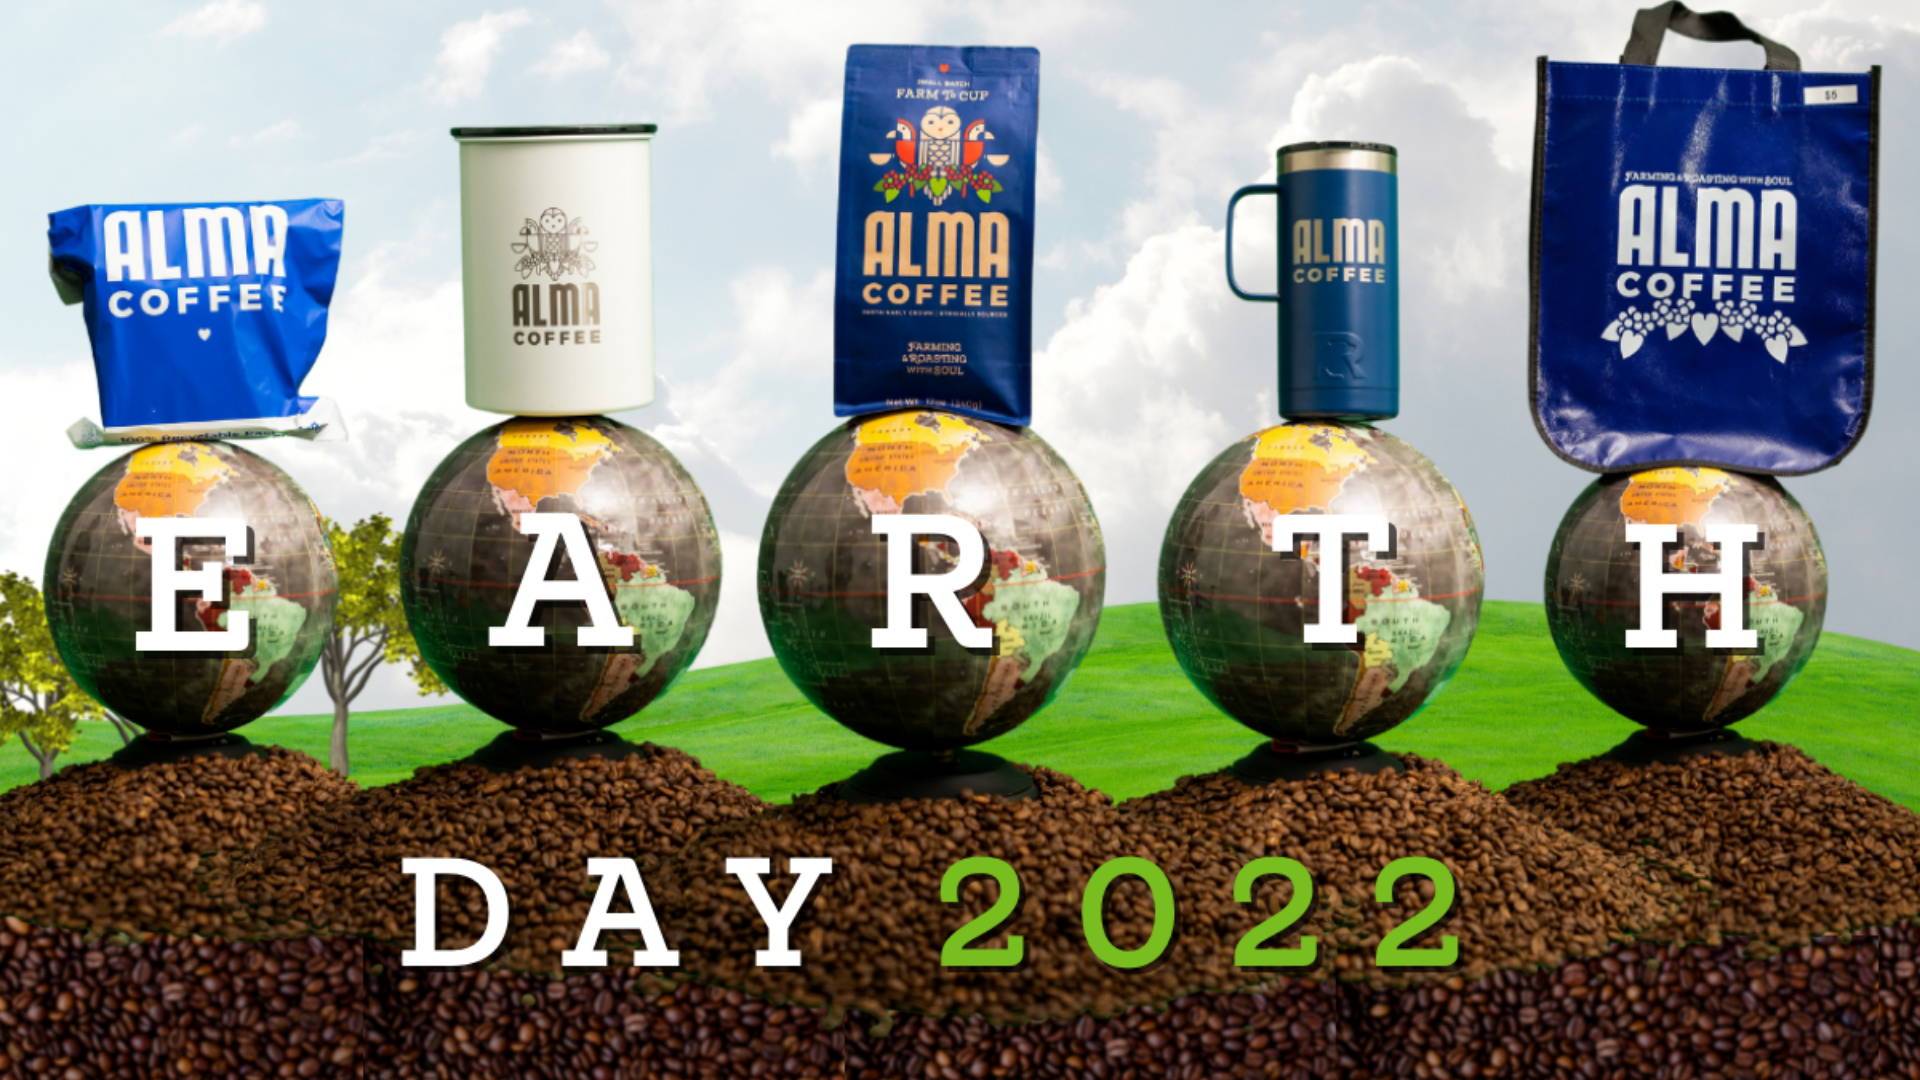 Earth Day Blog Header Image with Globes, Coffee Beans, and Coffee Merchandise